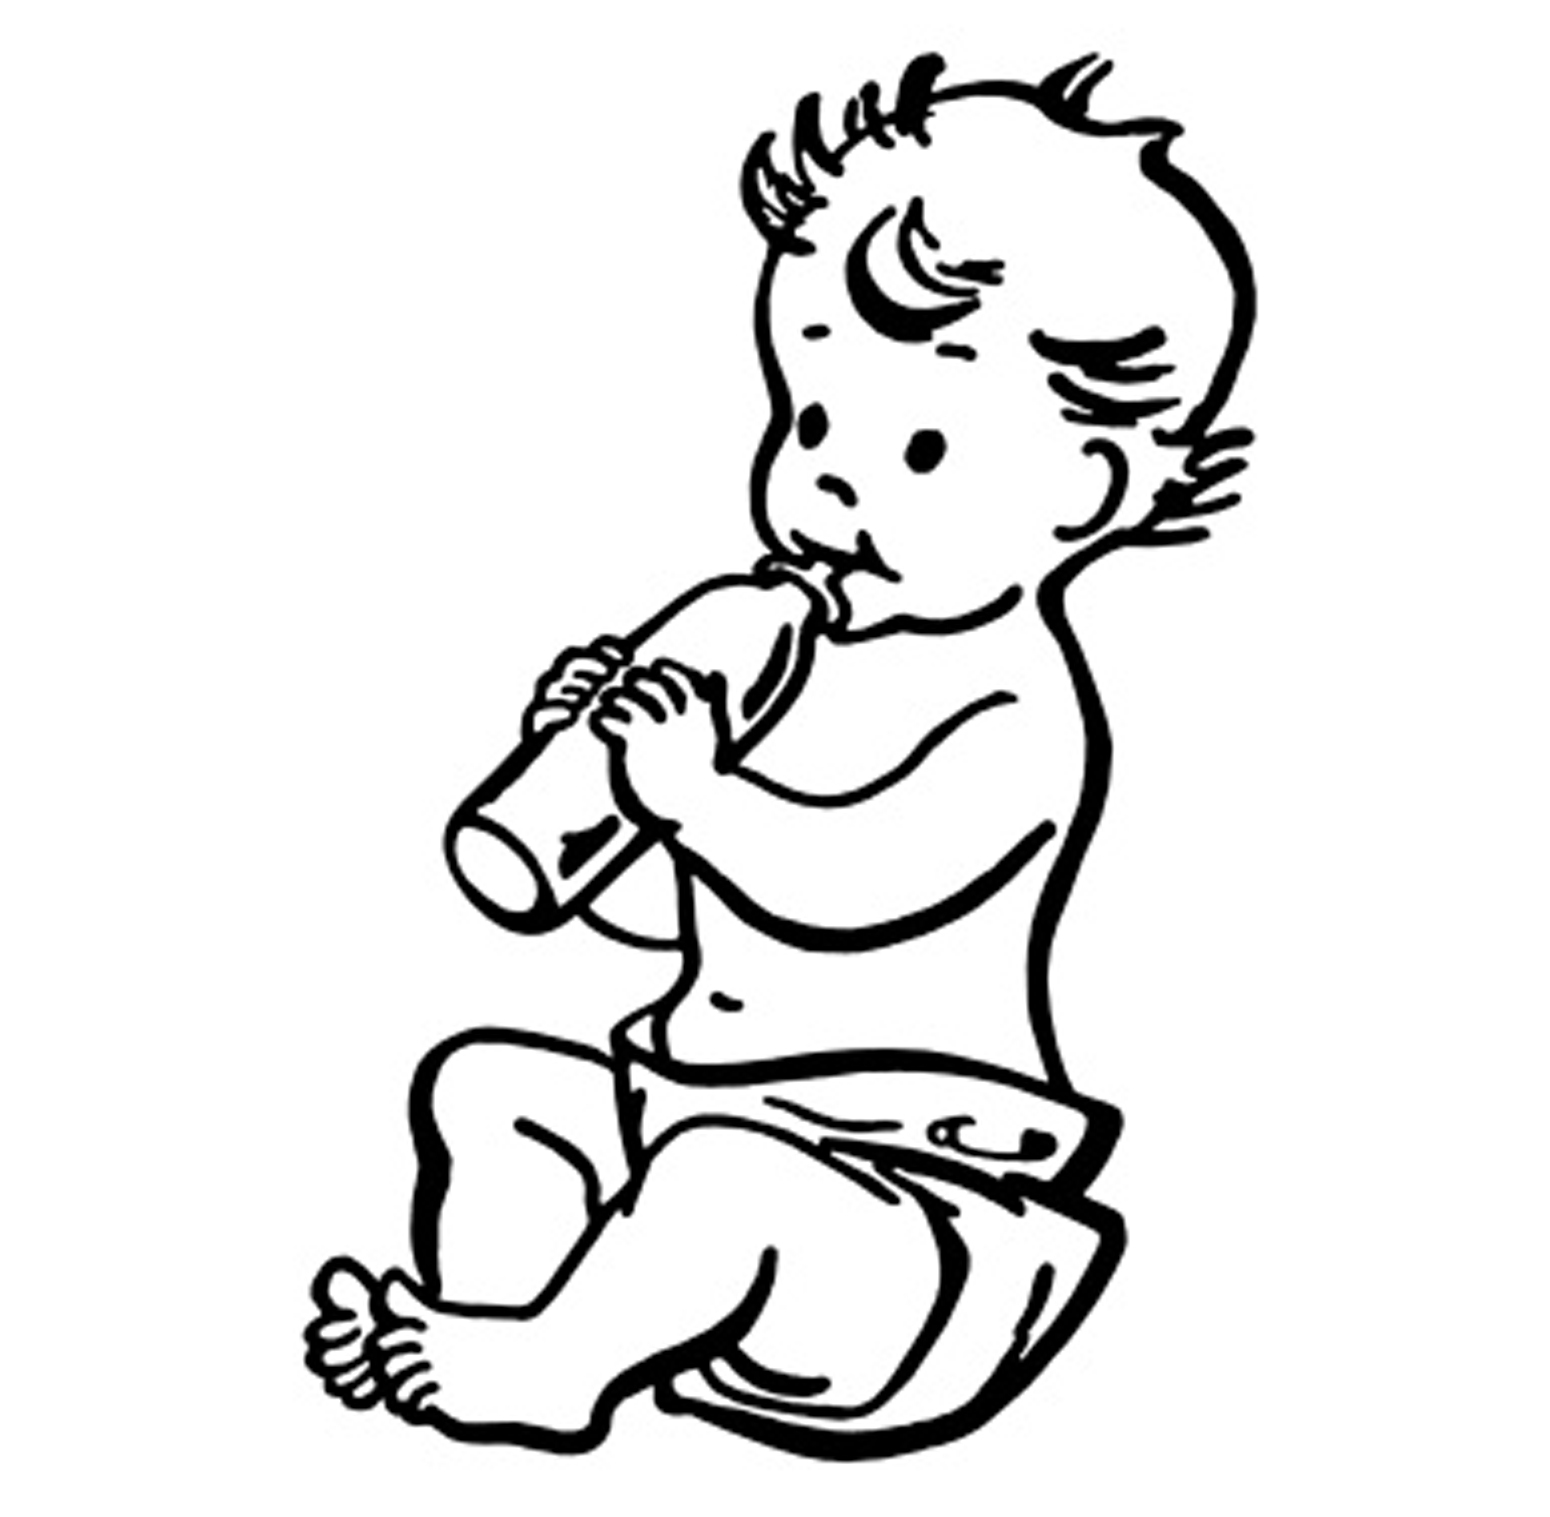 baby clipart black and white - photo #15